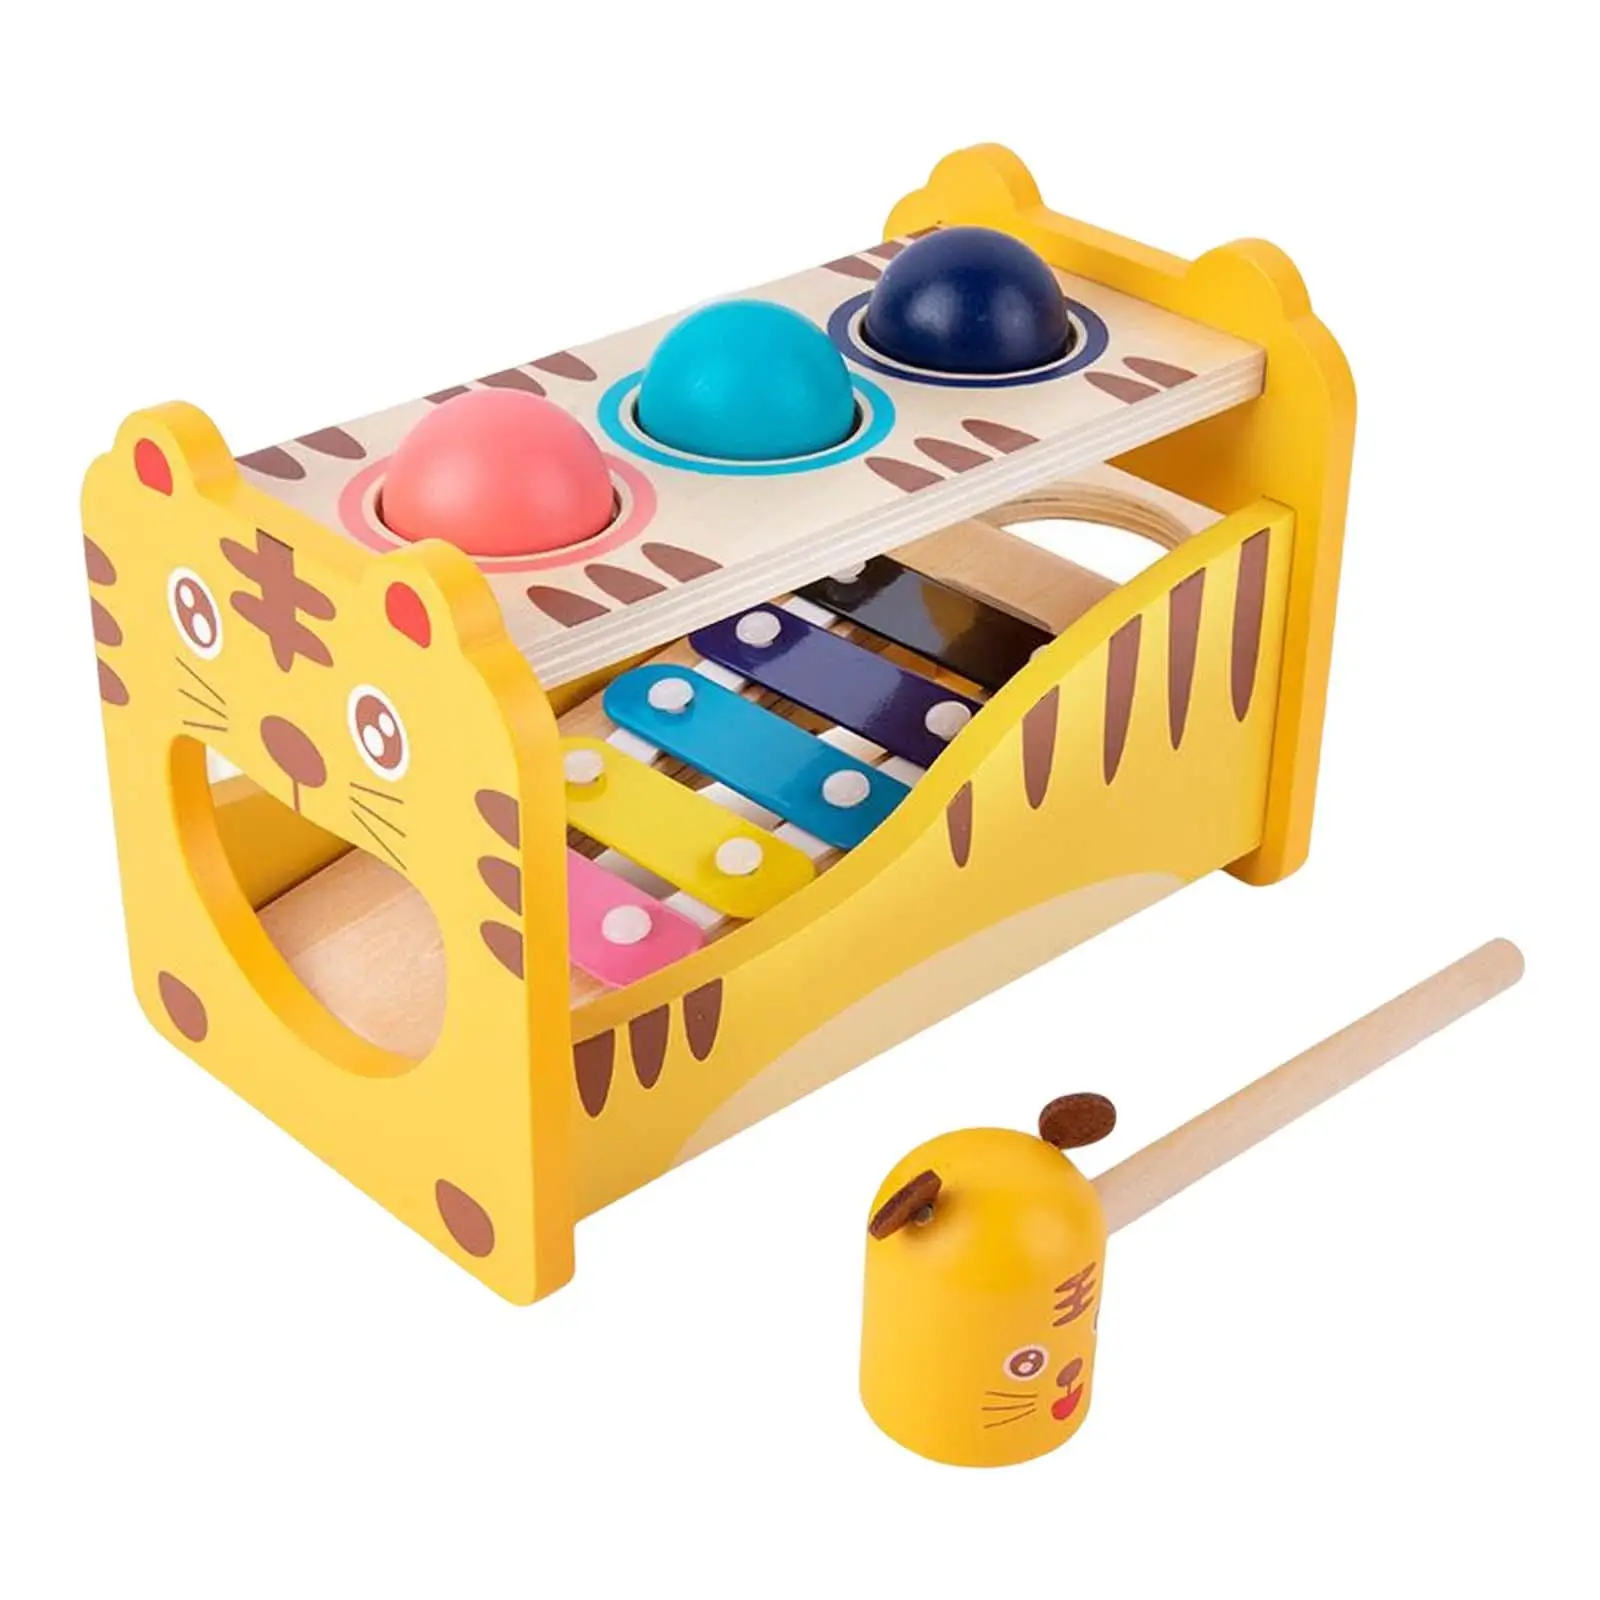 Wooden Musical Pounding Toy Musical Instrument Toys Tap benches with Slide Out Xylophone Hammering Toys for Girl